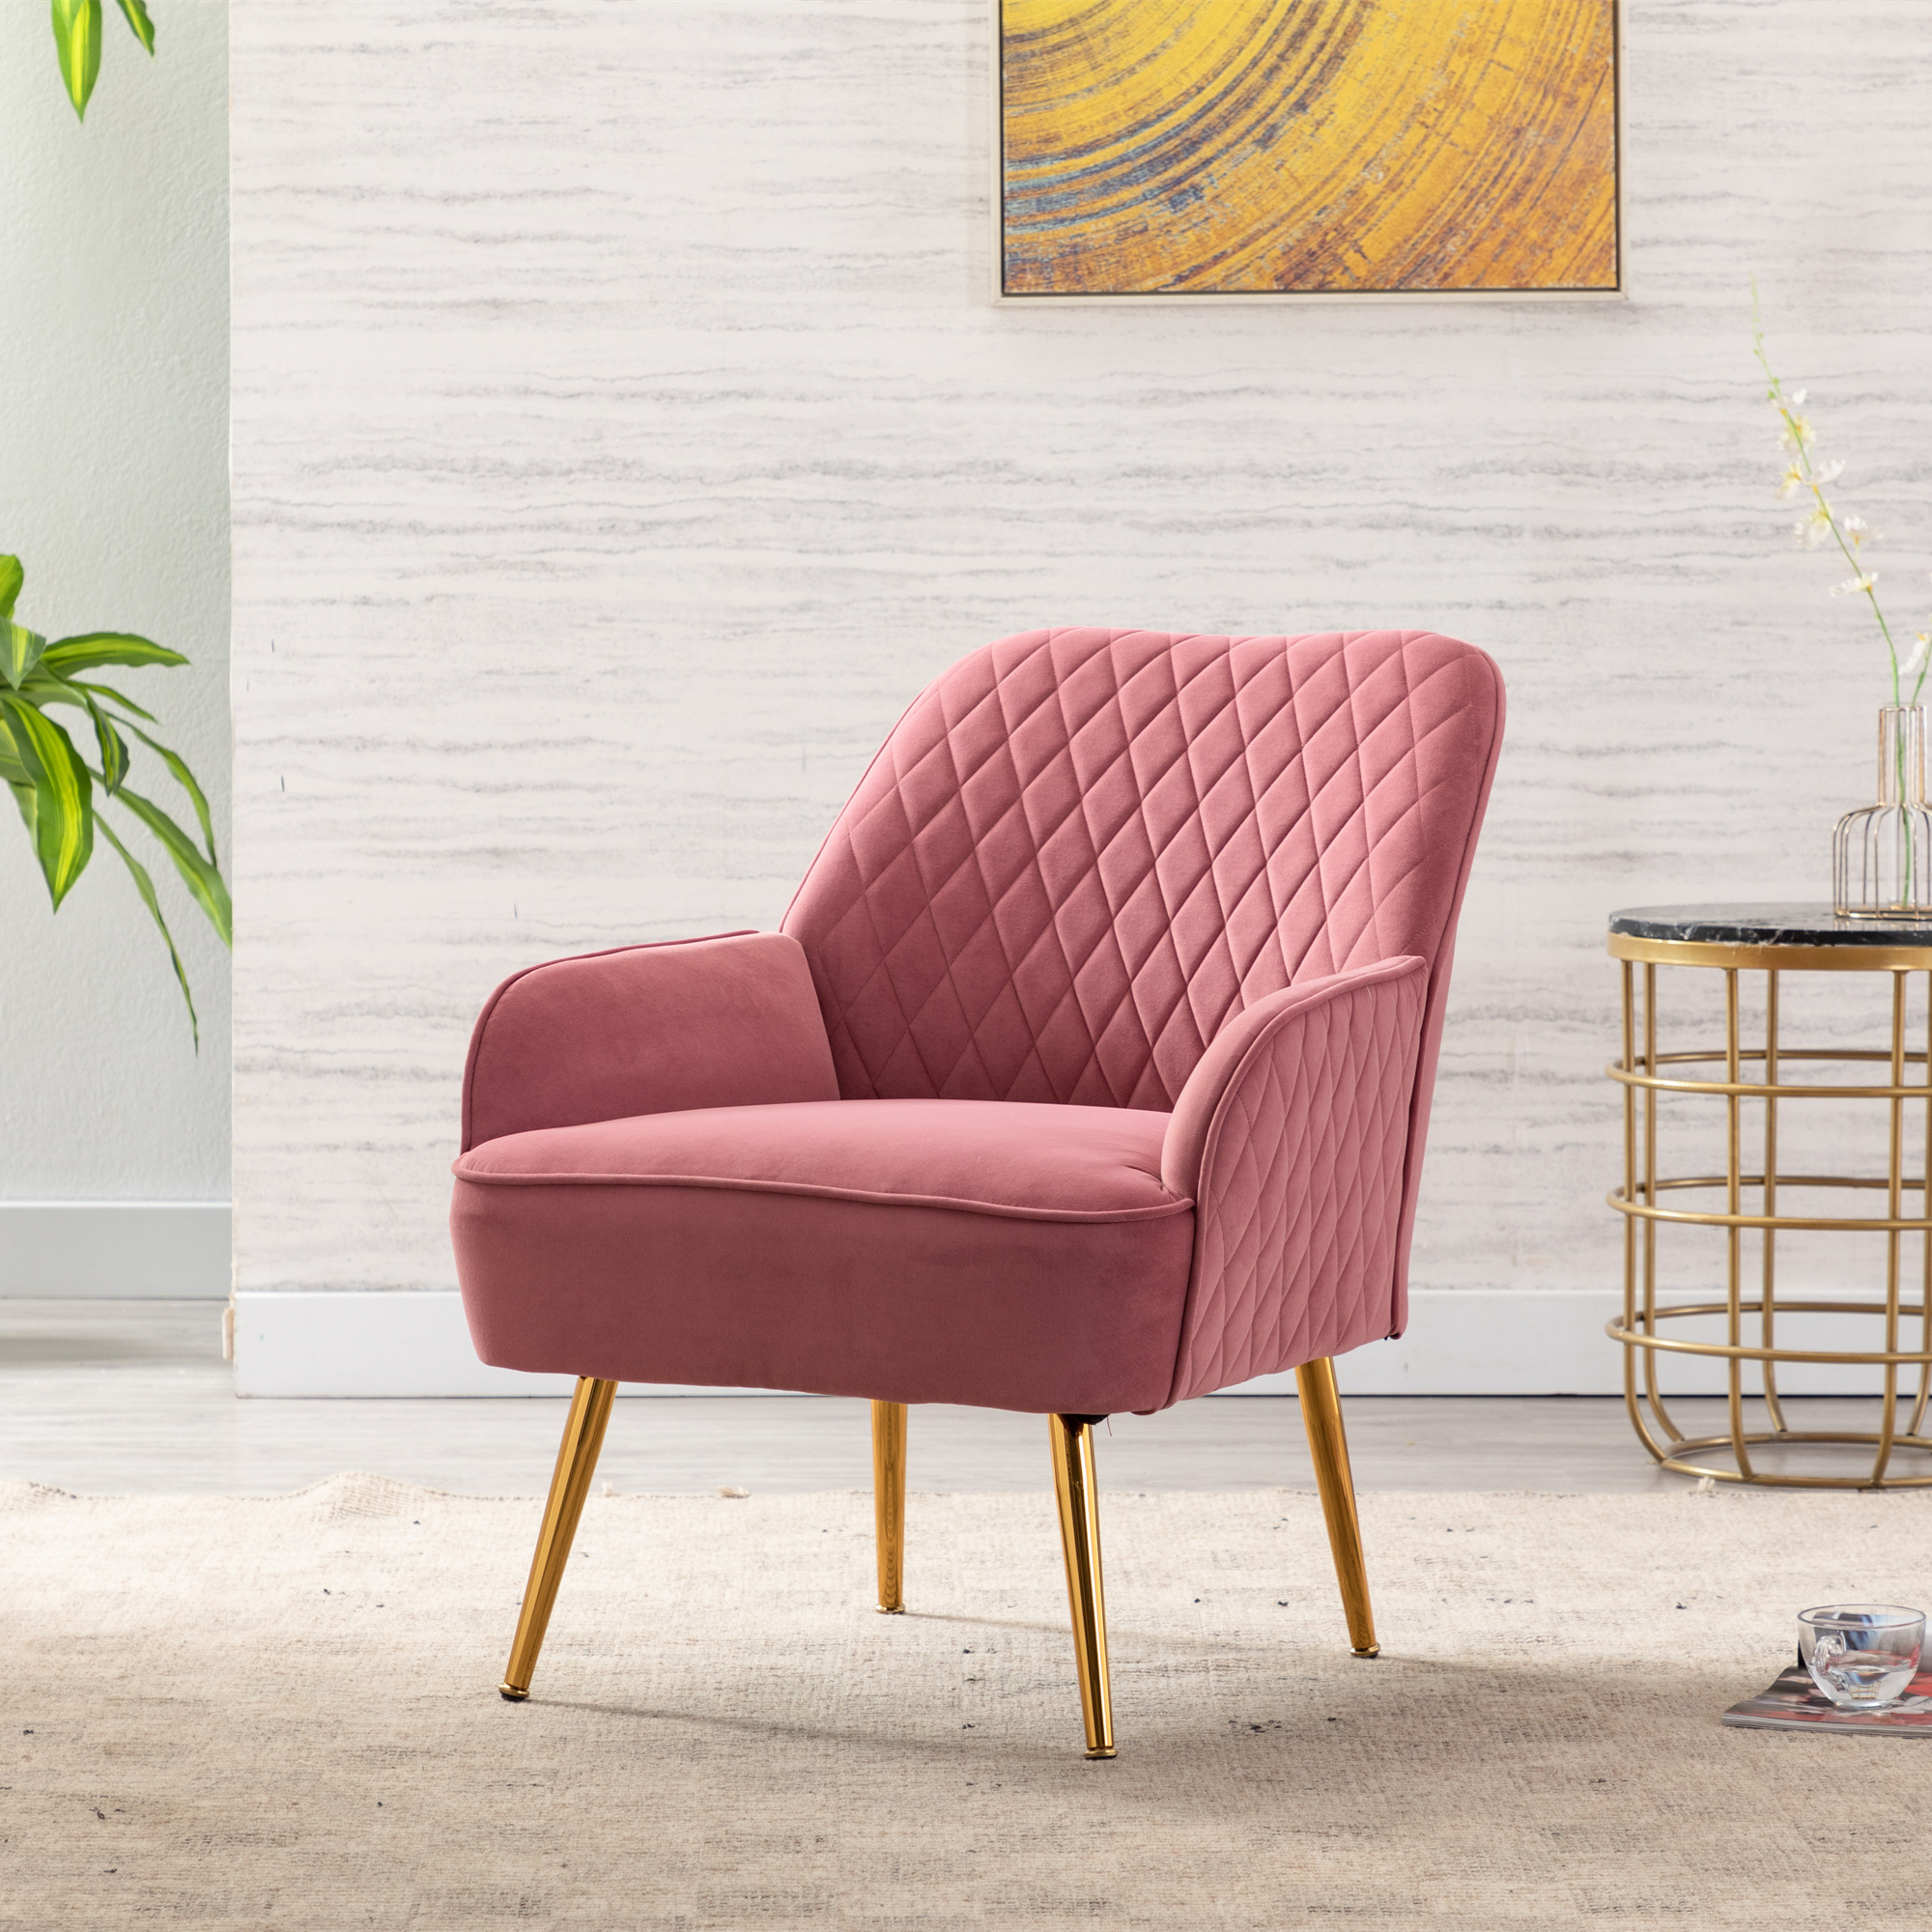 Modern Soft Velvet Material Dark Green Ergonomics Accent Chair Living Room Chair Bedroom Chair Home Chair With Gold Legs And Adjustable Legs For Indoor Home Pink-Boyel Living